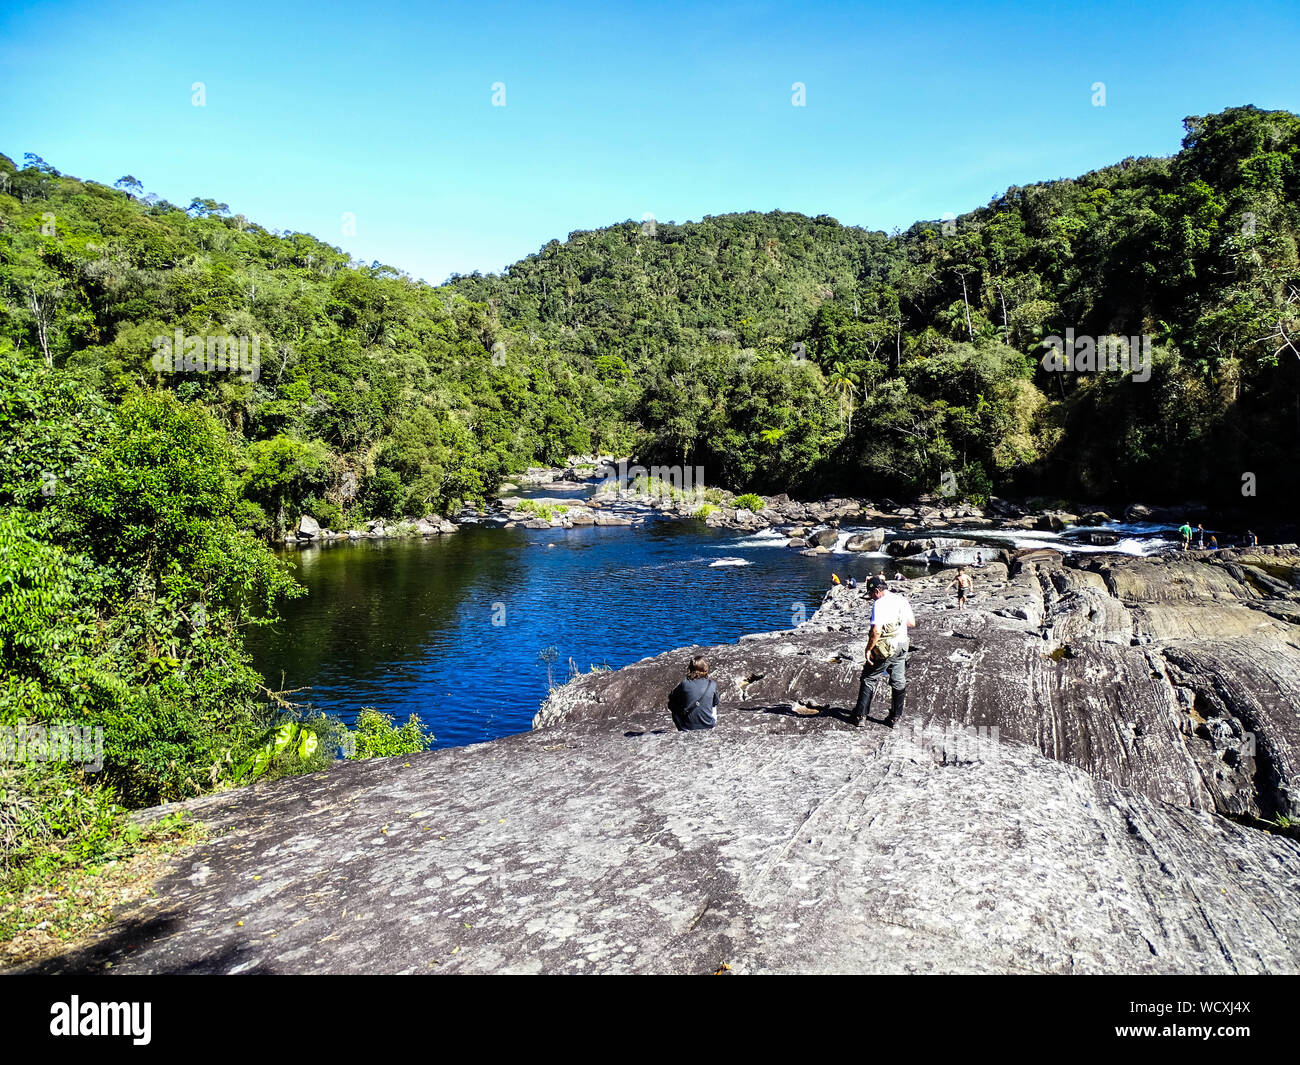 Scenic View Of River In Forest Against Clear Blue Sky Stock Photo